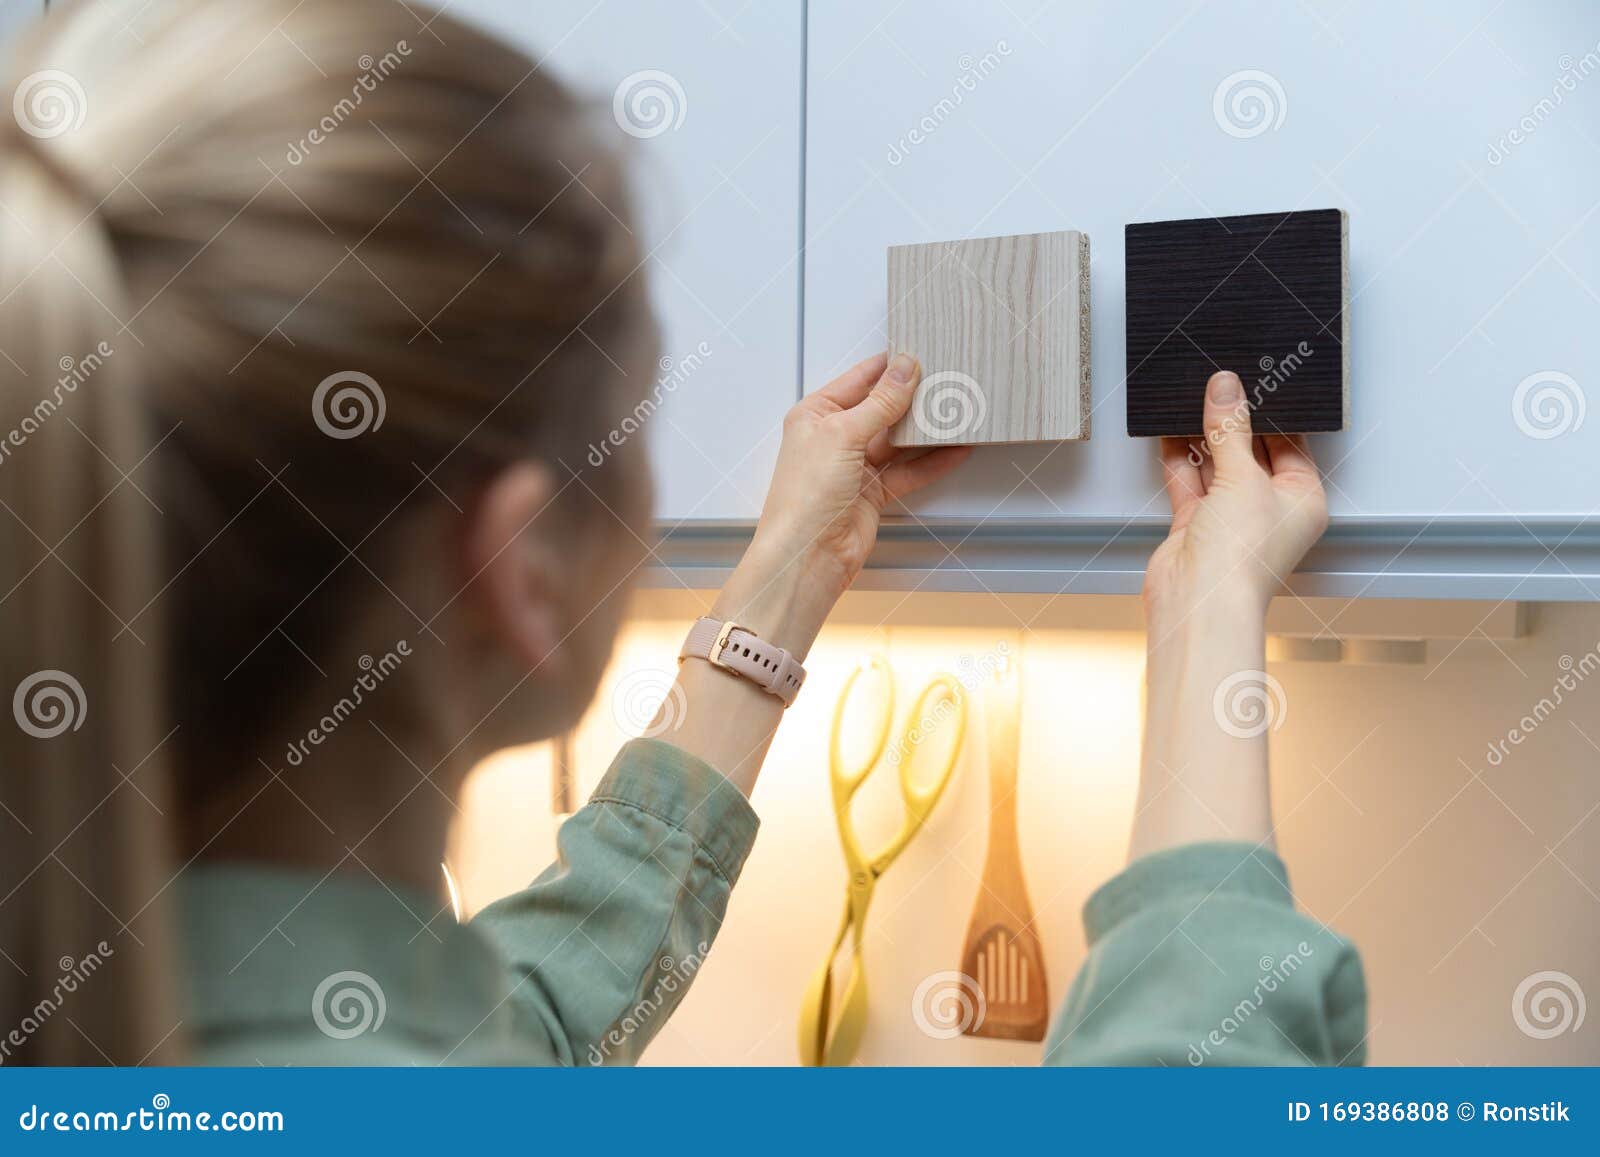 woman choosing kitchen cabinet materials from laminate samples